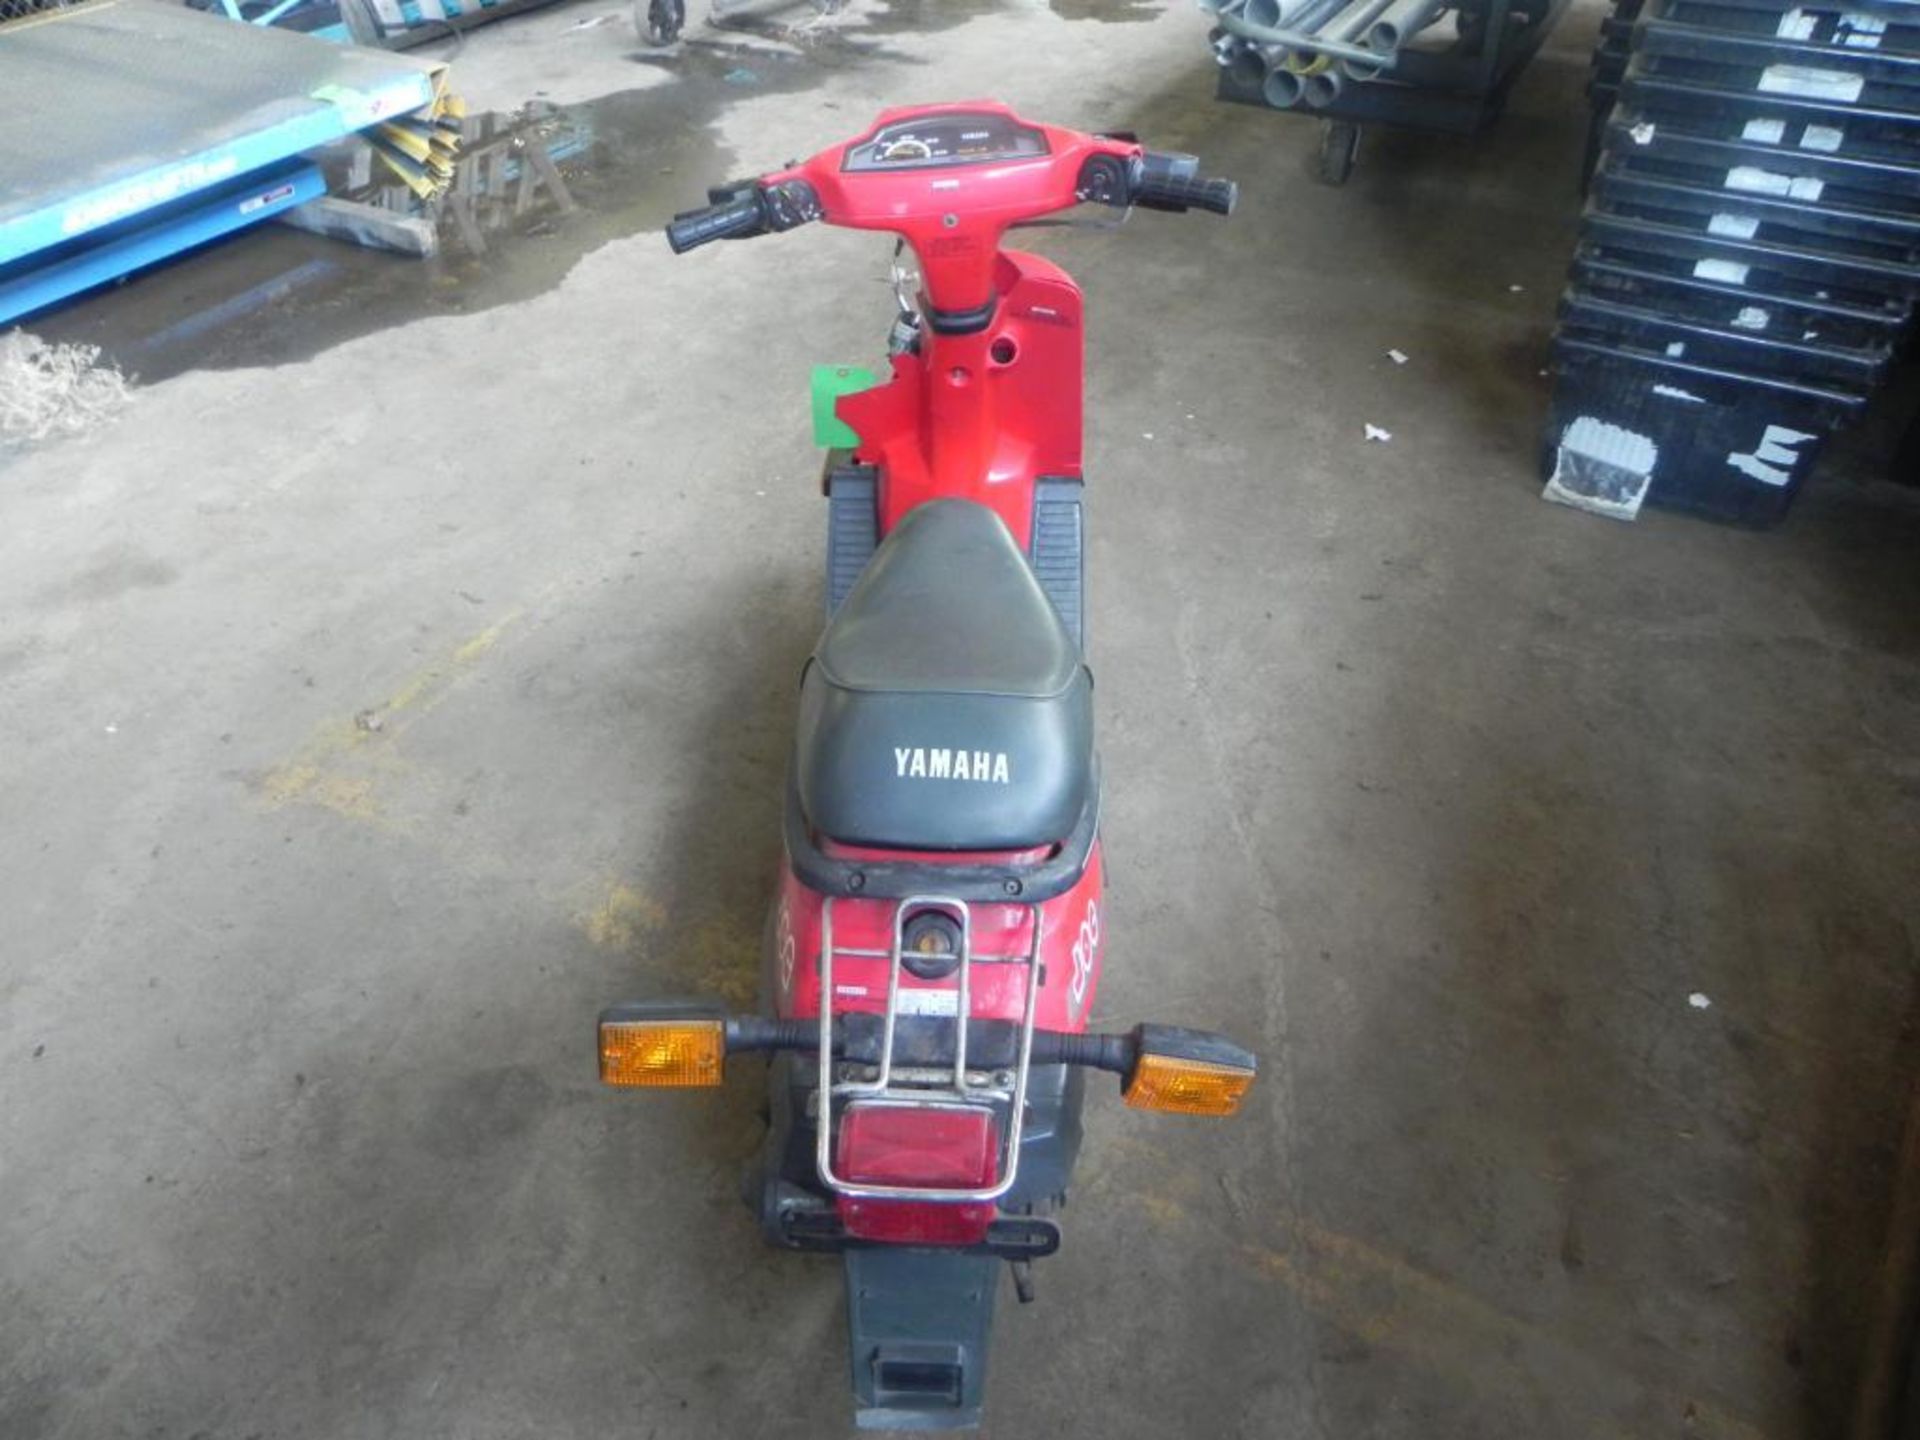 Yamaha Jog Gas Powered Scooter (1986) 24,446 Miles Showing, Need Repairs - Image 2 of 6